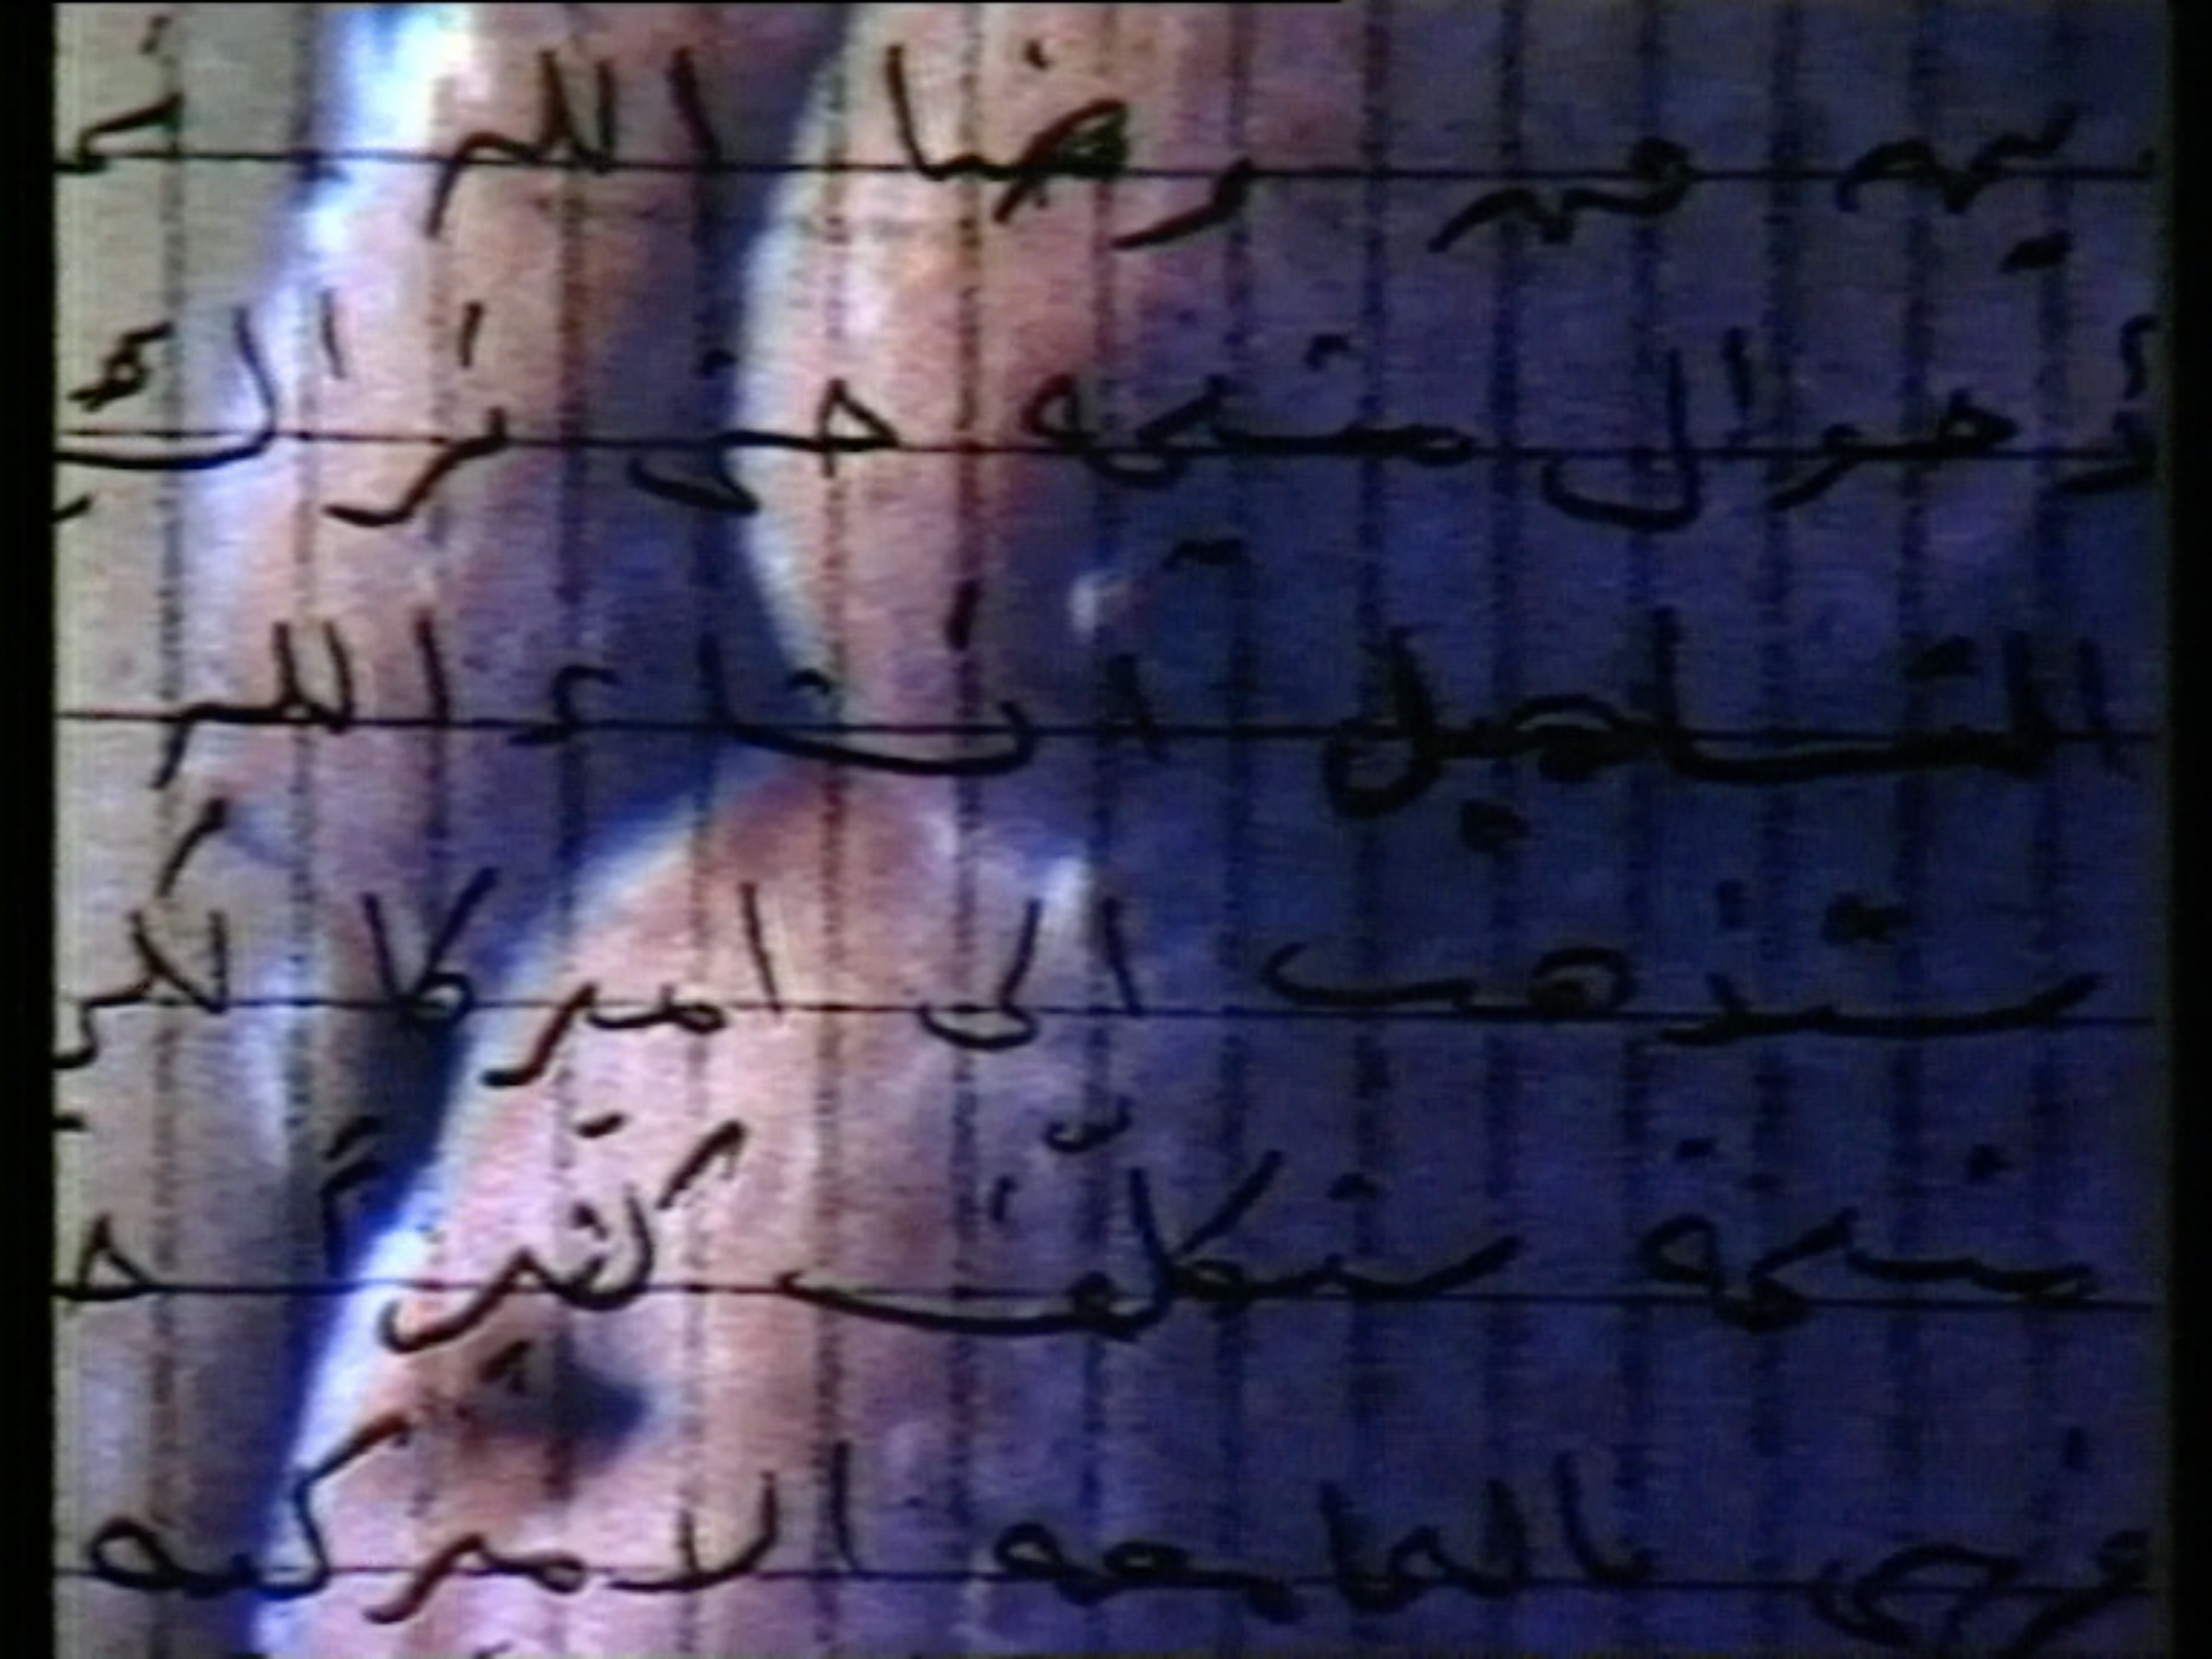 A still from measures of distance by mona hatoum A closer look at a naked torso from the belly button to breast is layered with a grid and handwritten arabic letters